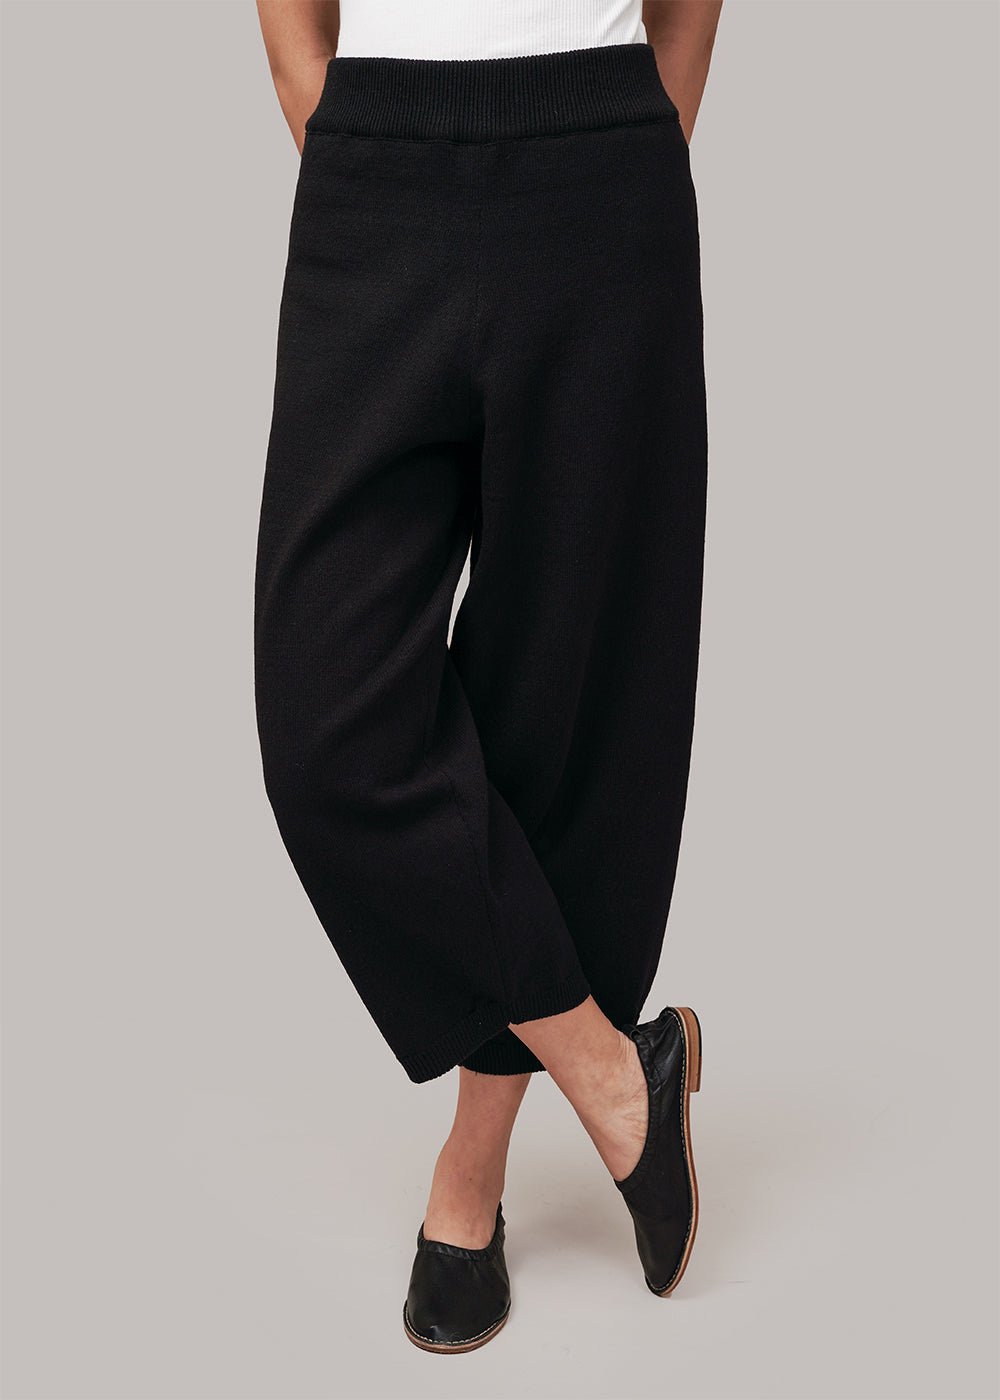 Cotton Knitted Pants in Black by CORDERA – New Classics Studios